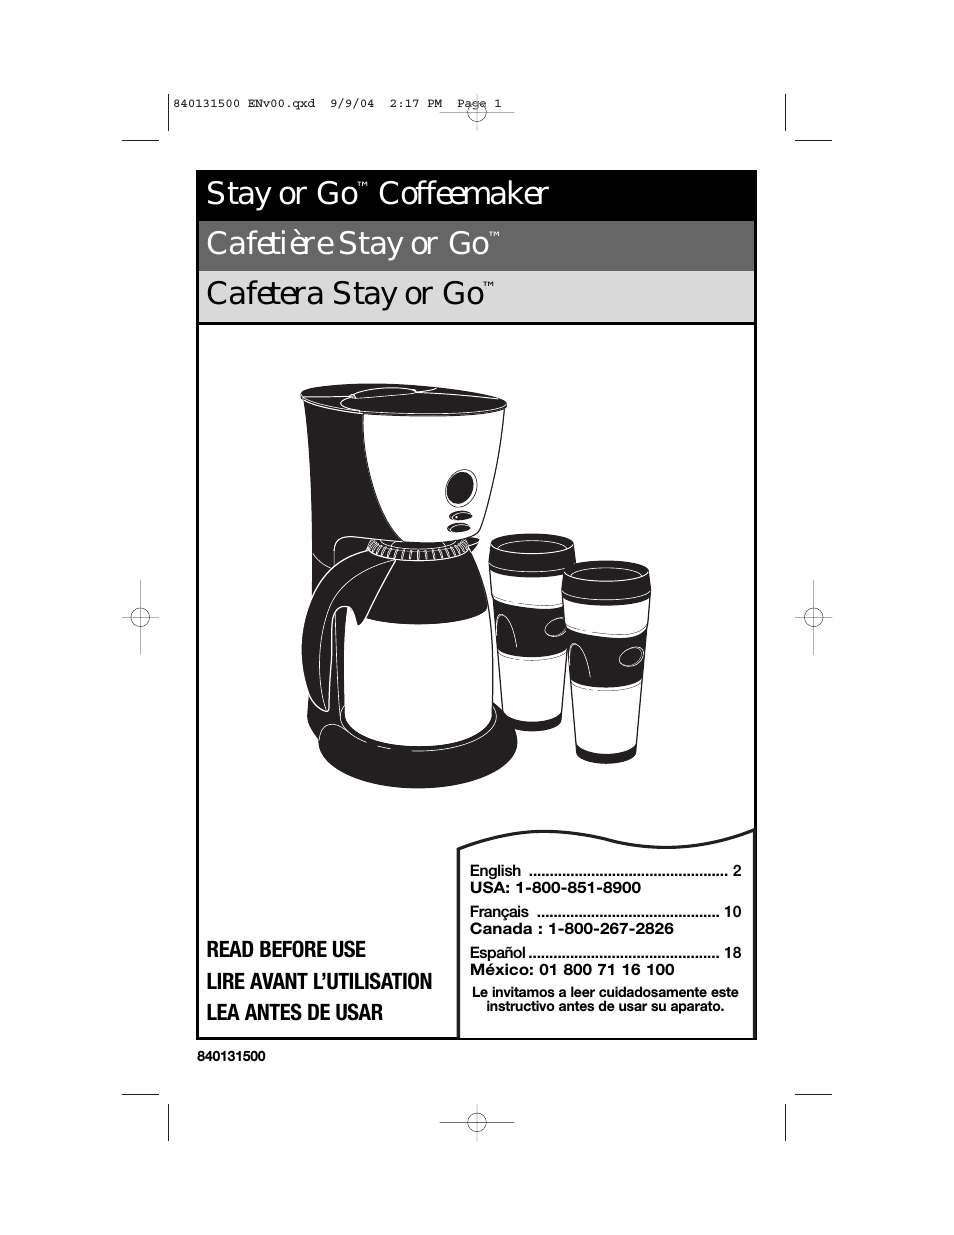 Stay or Go Coffeemaker